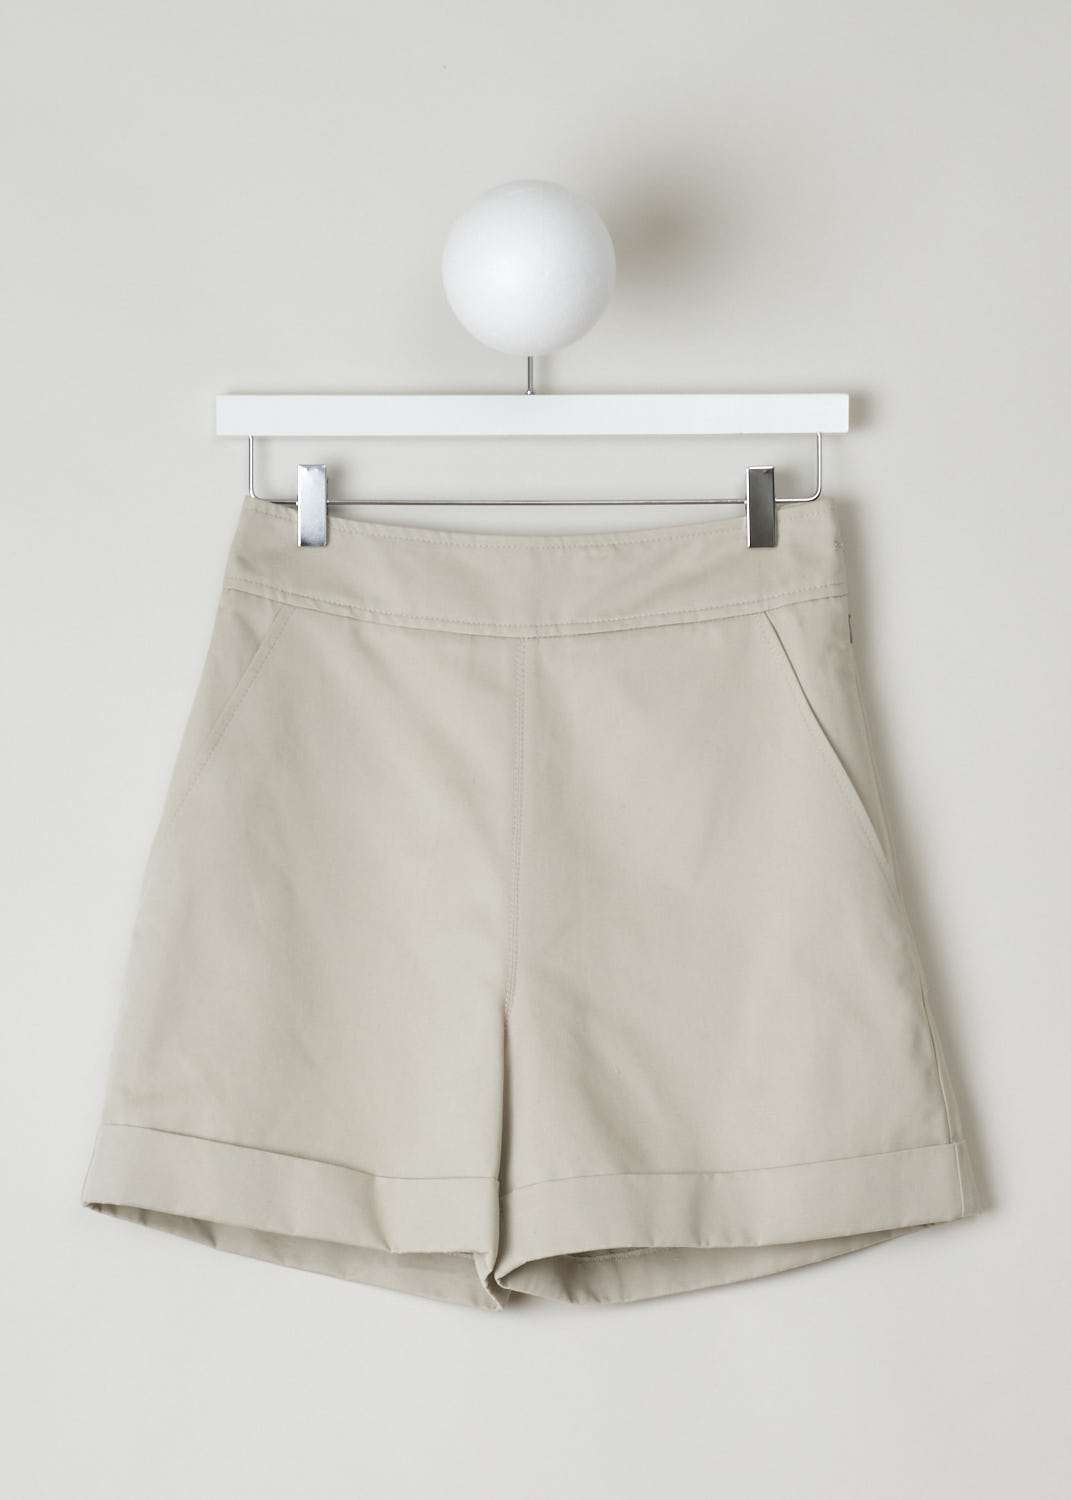 MARNI, BEIGE HIGH WAISTED SAFARI SHORTS, PAMA0151A0_TCZ35_00W20, Beige, Front, These fun high waisted safari shorts have a broad waistband. The closure option on the model is a concealed zipper on the side, as well as a single black button. On either side, a slanted pocket can be found. A single welt pocket with button can be found in the back. These shorts have a folded over hem.
